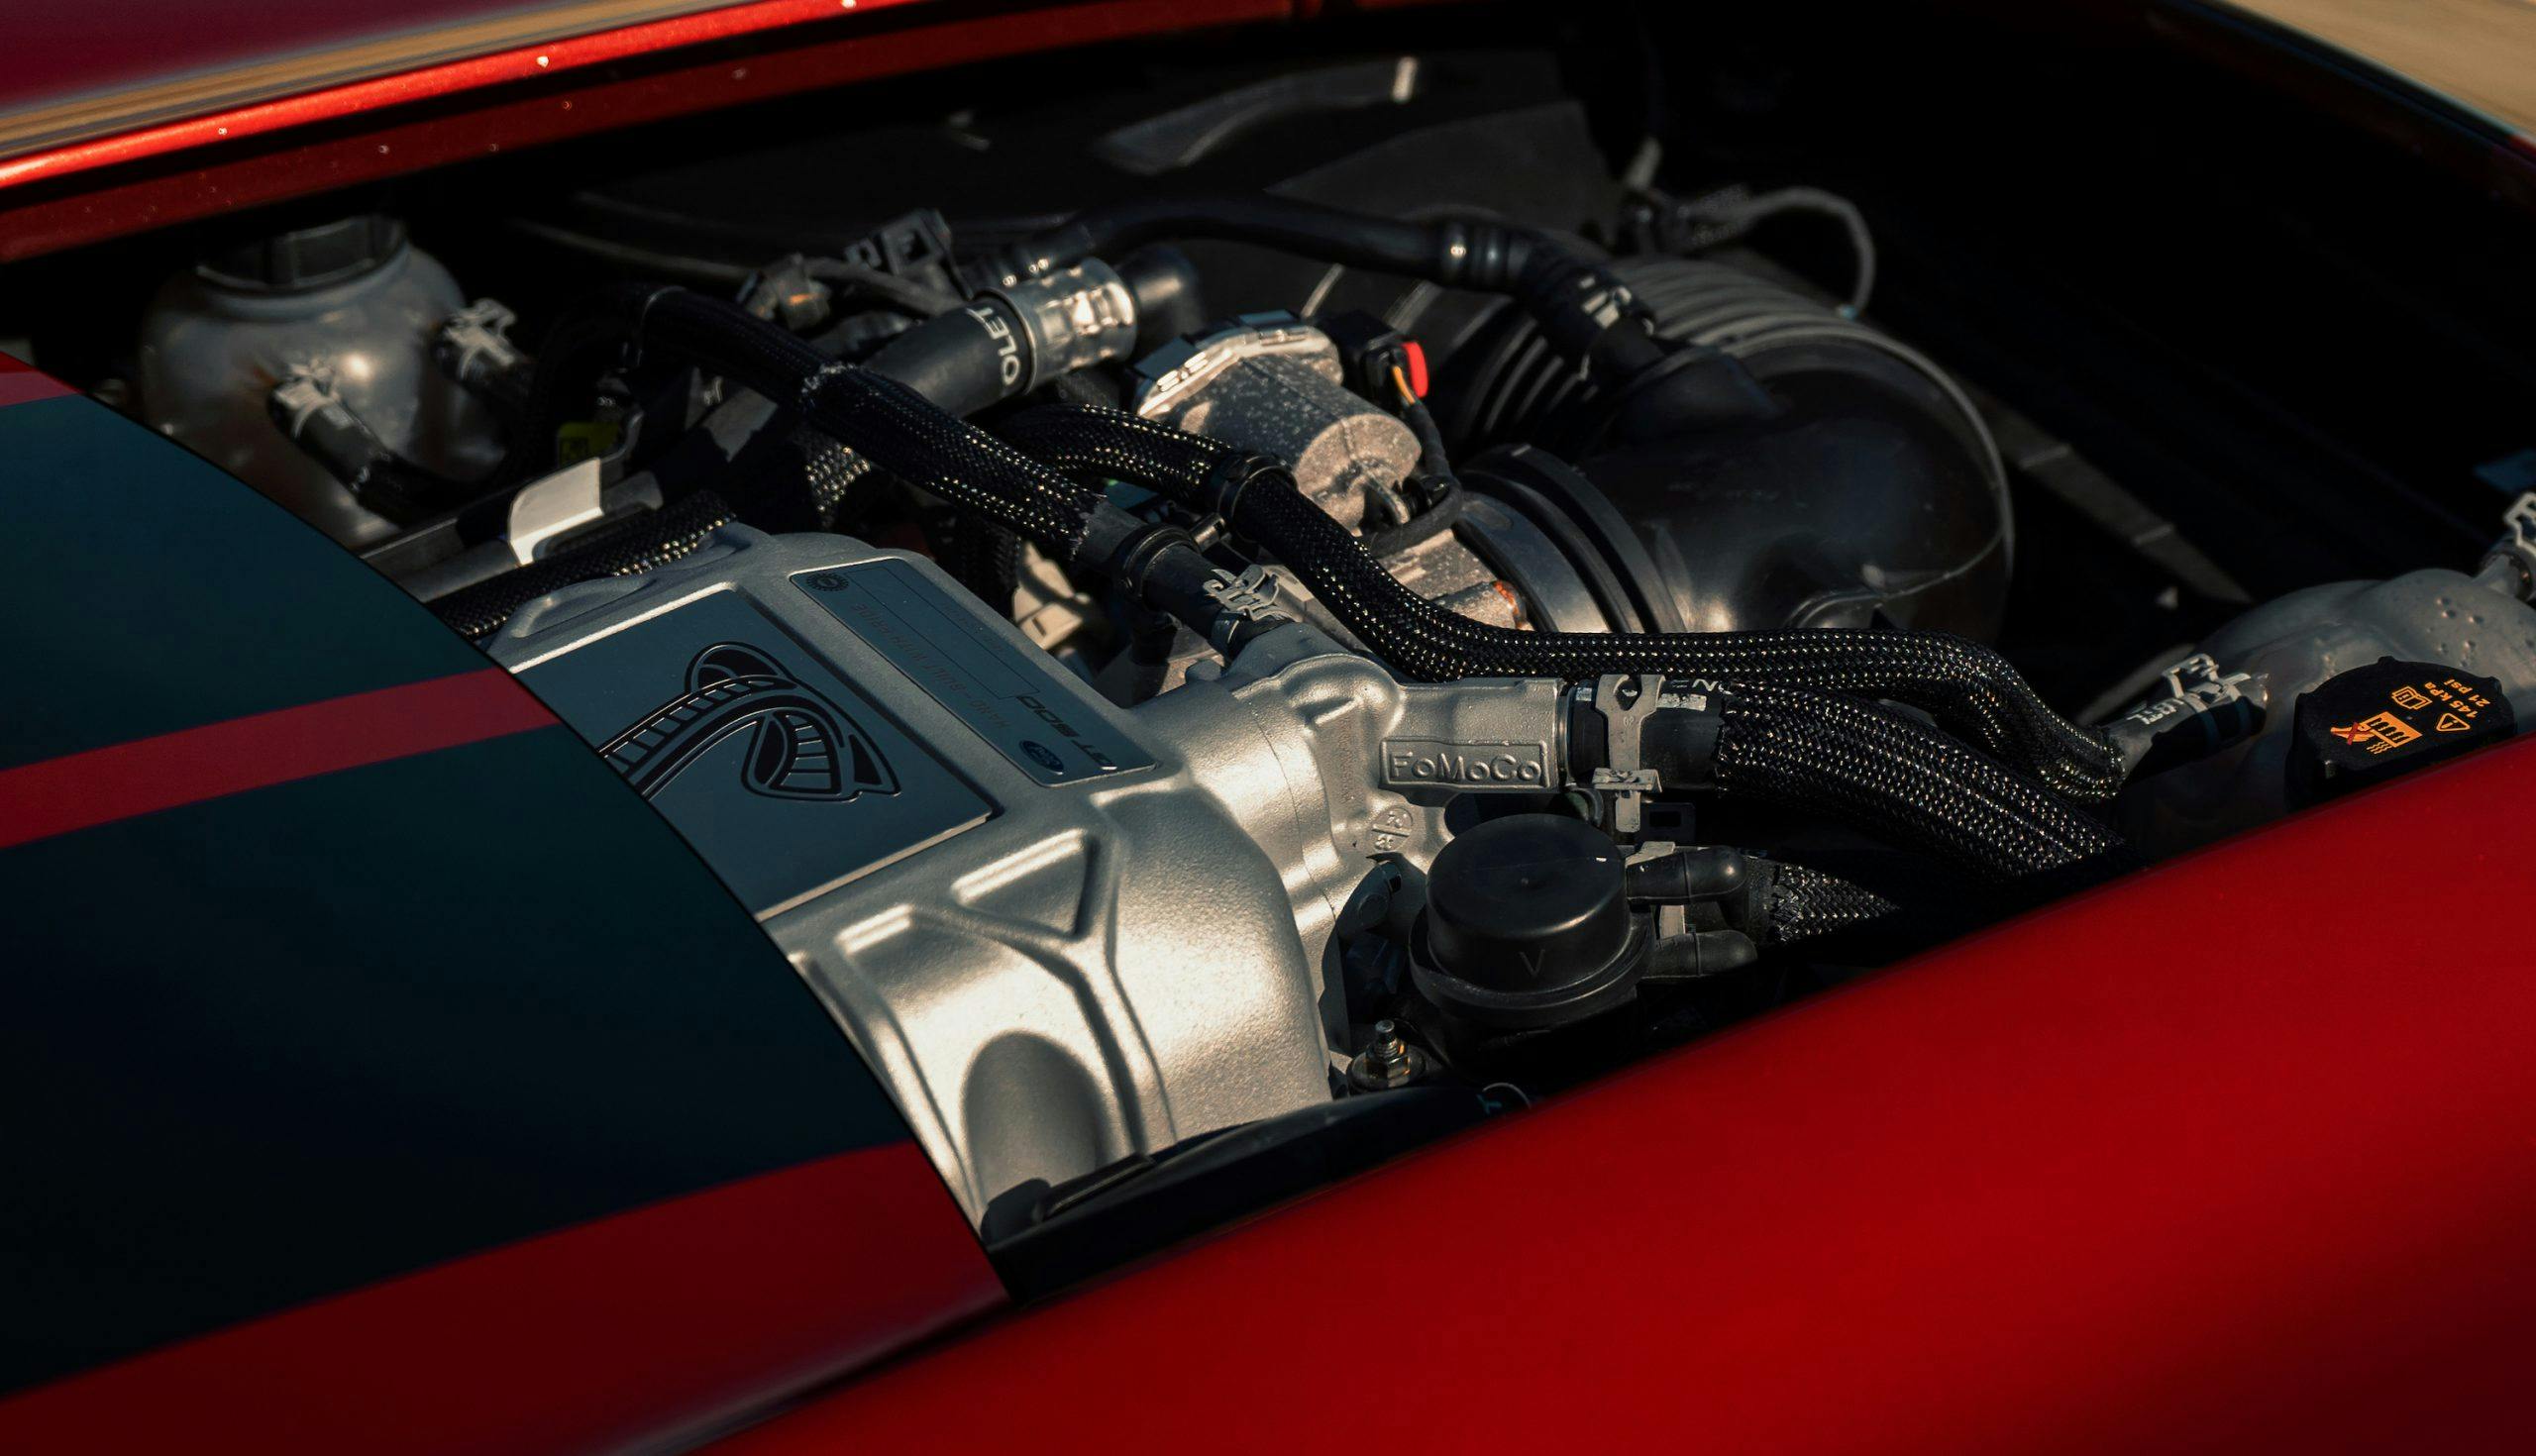 2020 Mustang Shelby GT500 Engine